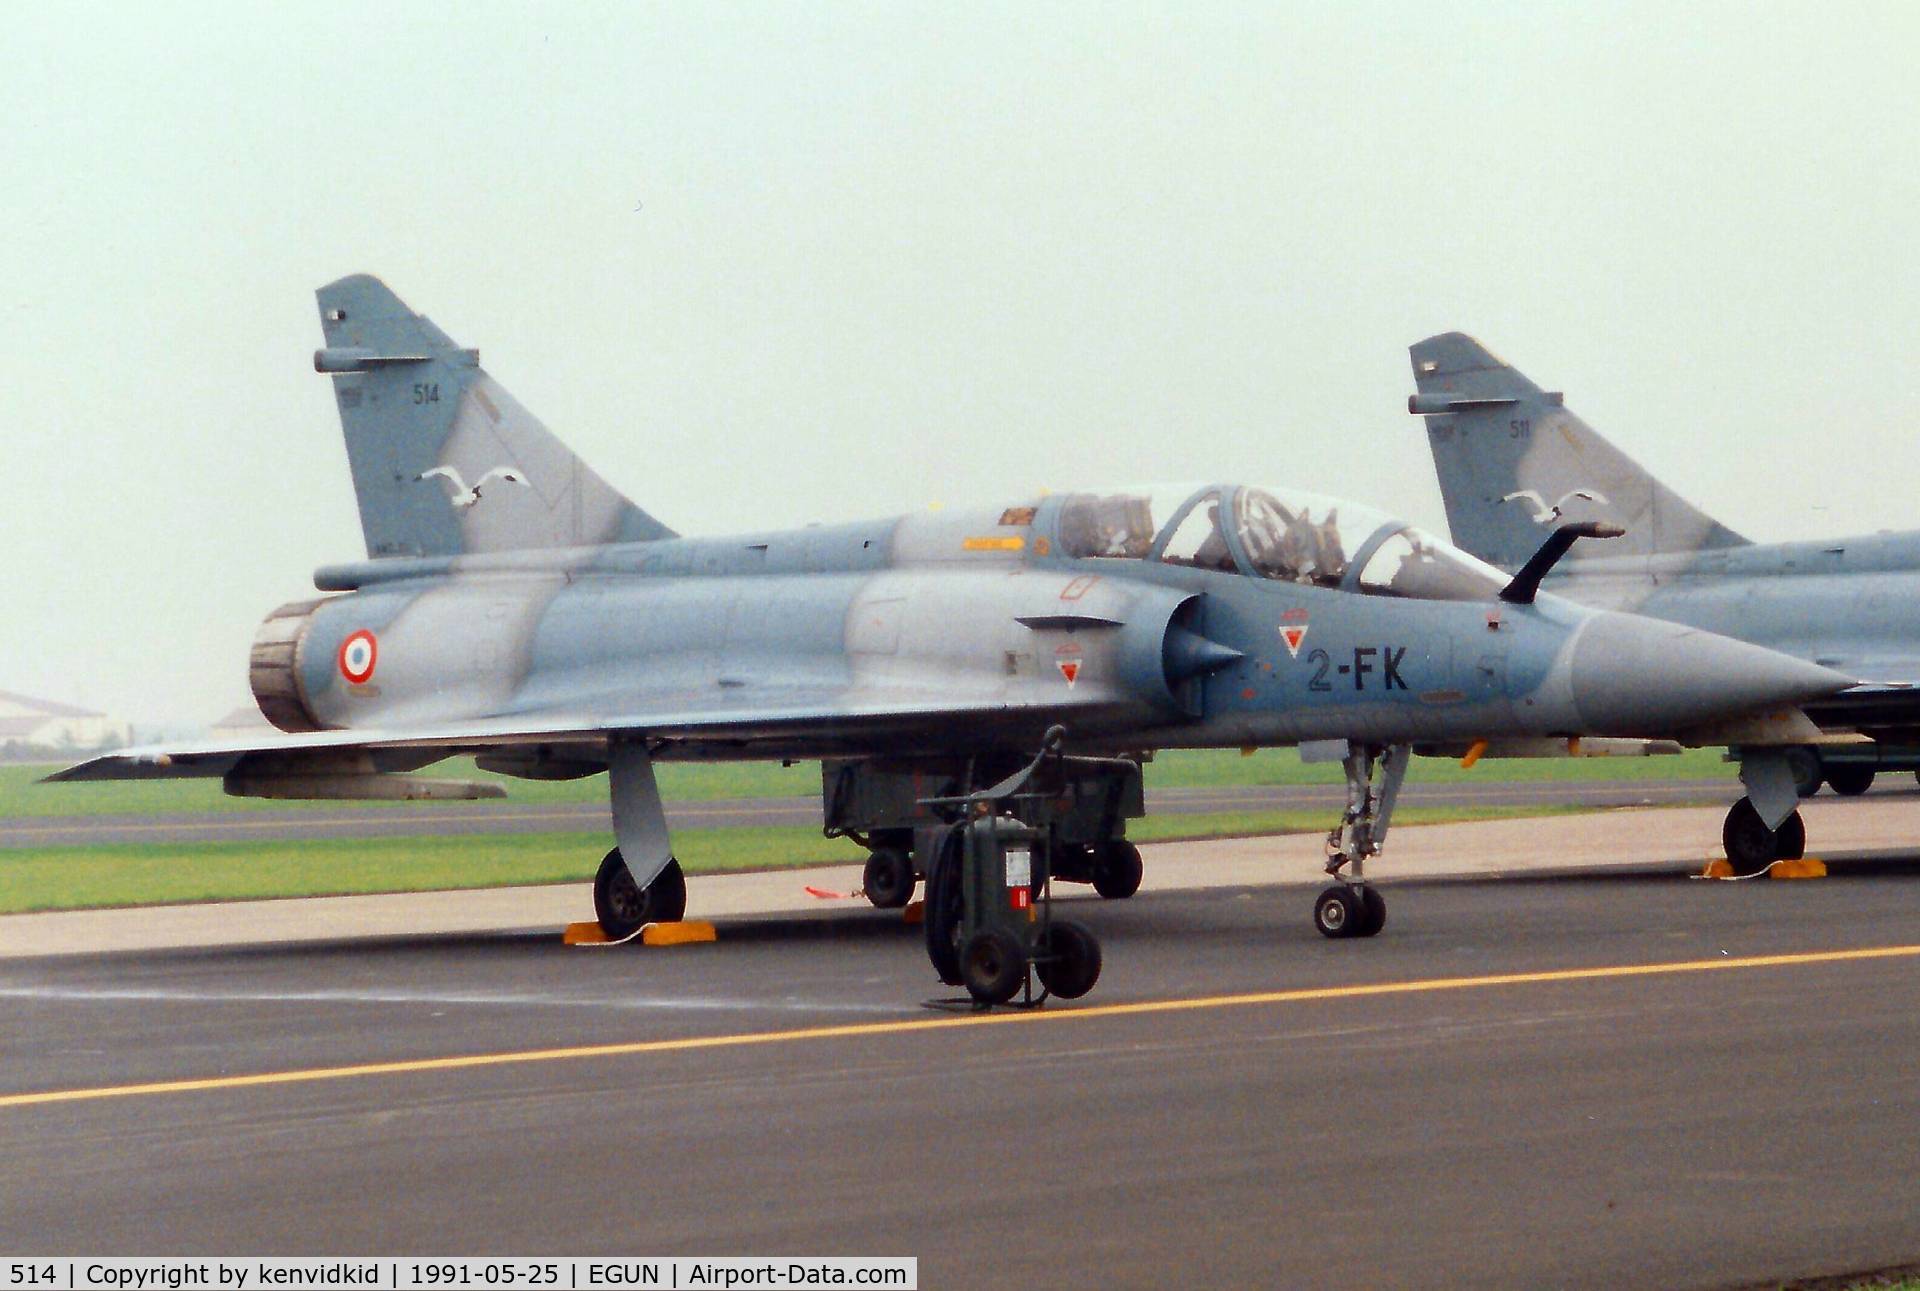 514, Dassault Mirage 2000B C/N 164, At the 1991 Mildenhall Air Fete. Scanned from print.